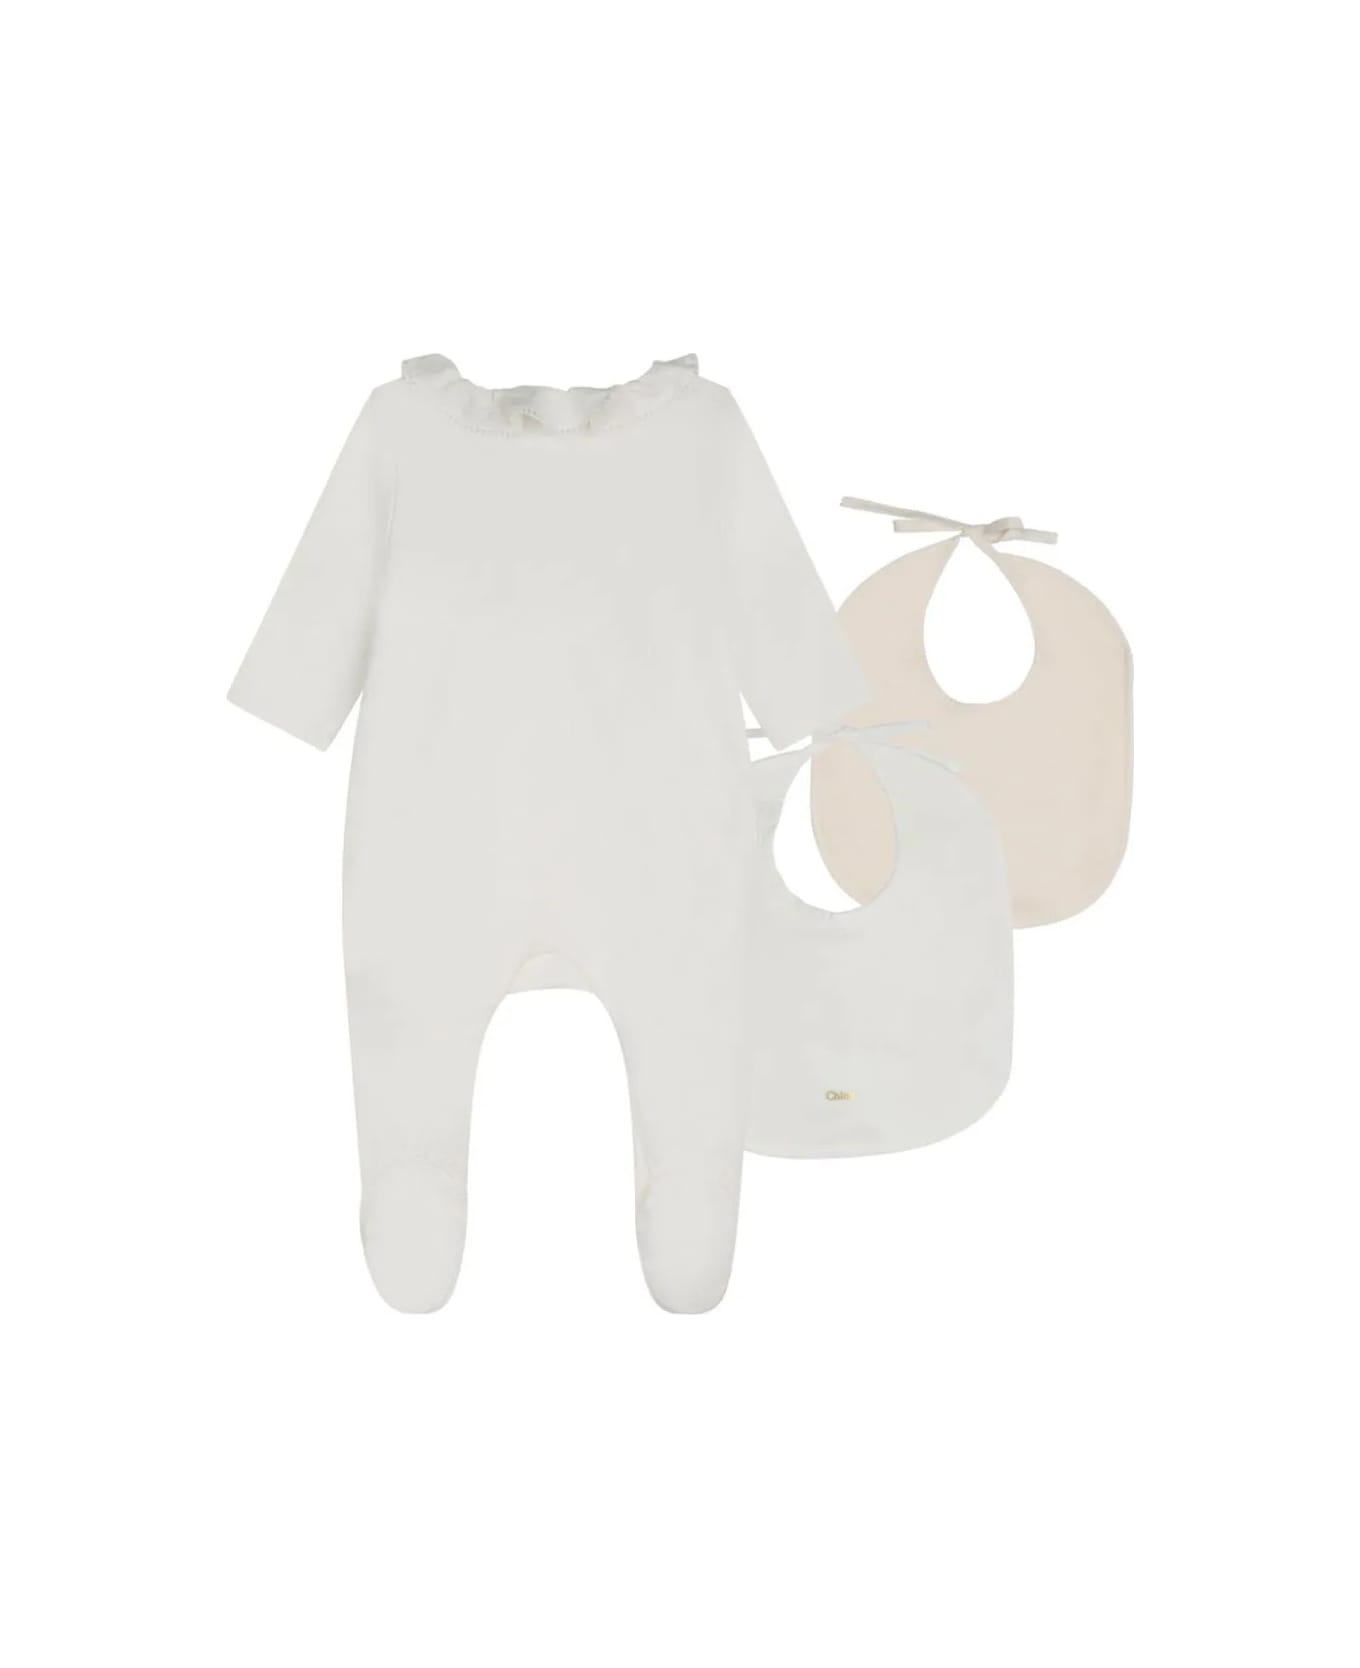 Chloé Gift Set With Playsuit And Bibs - White トップス